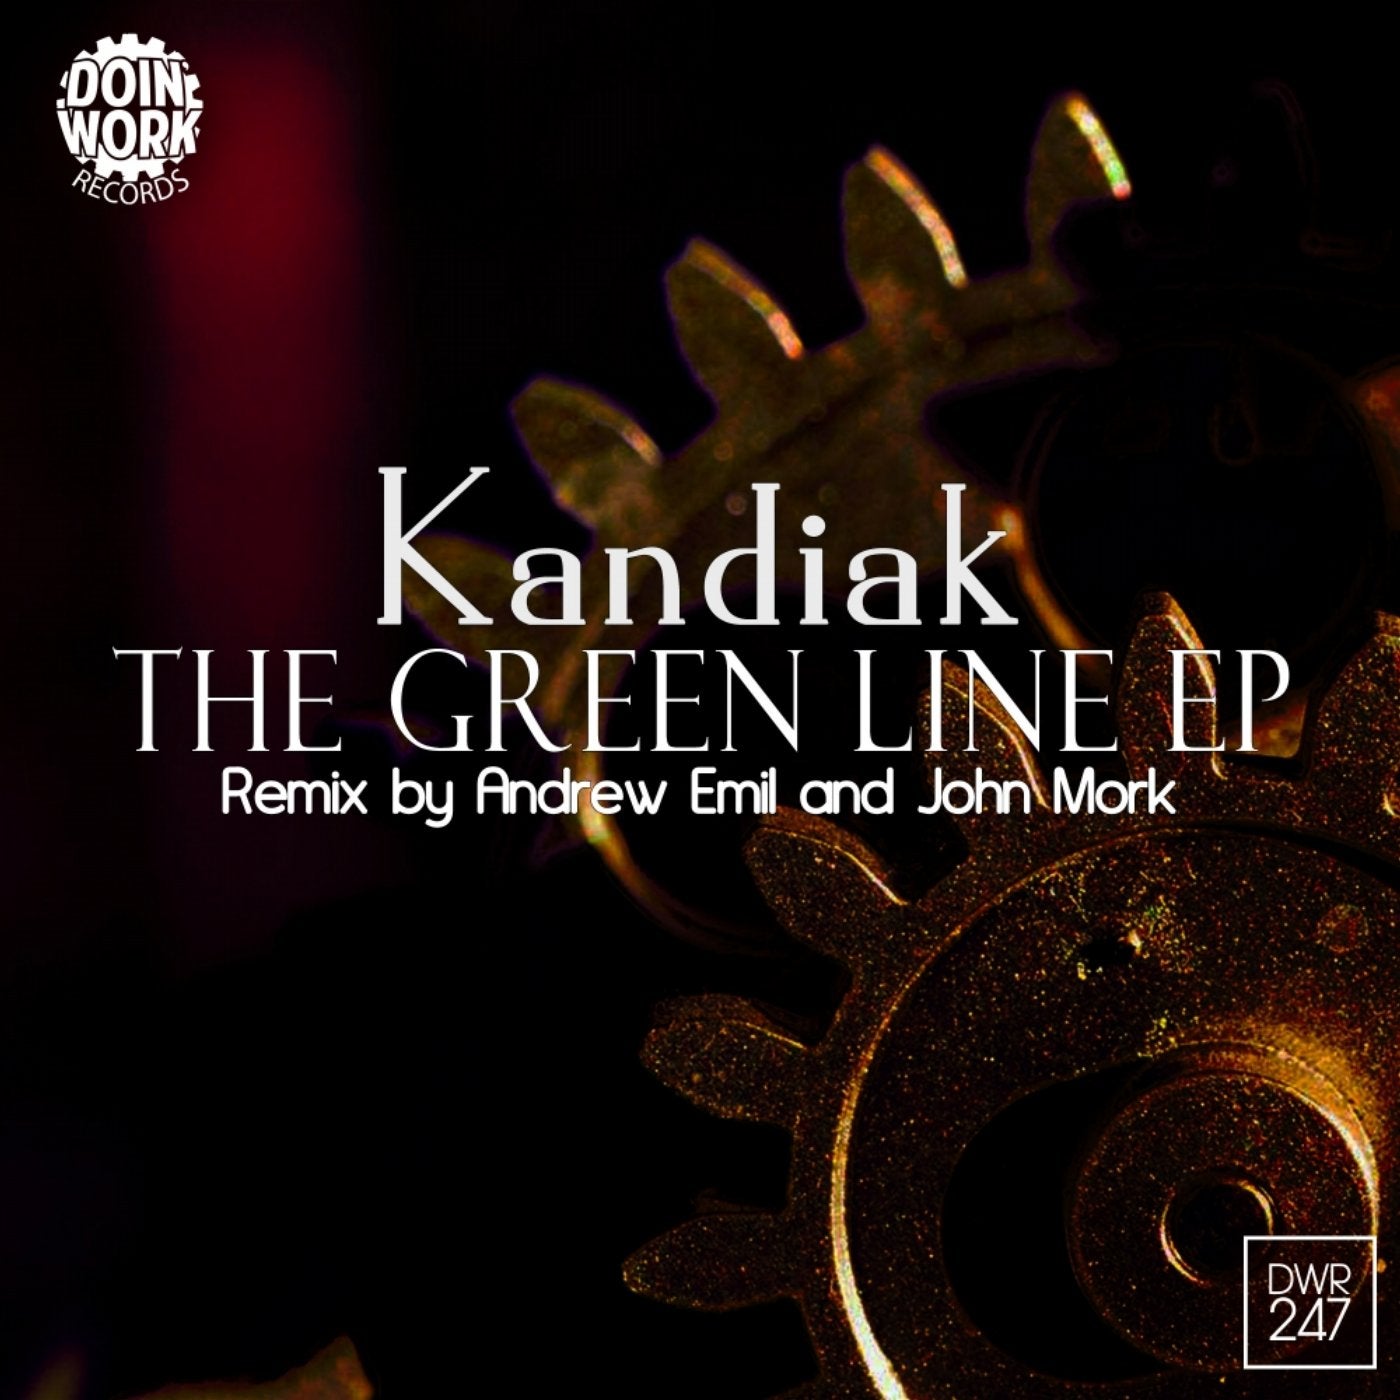 The Green Line EP